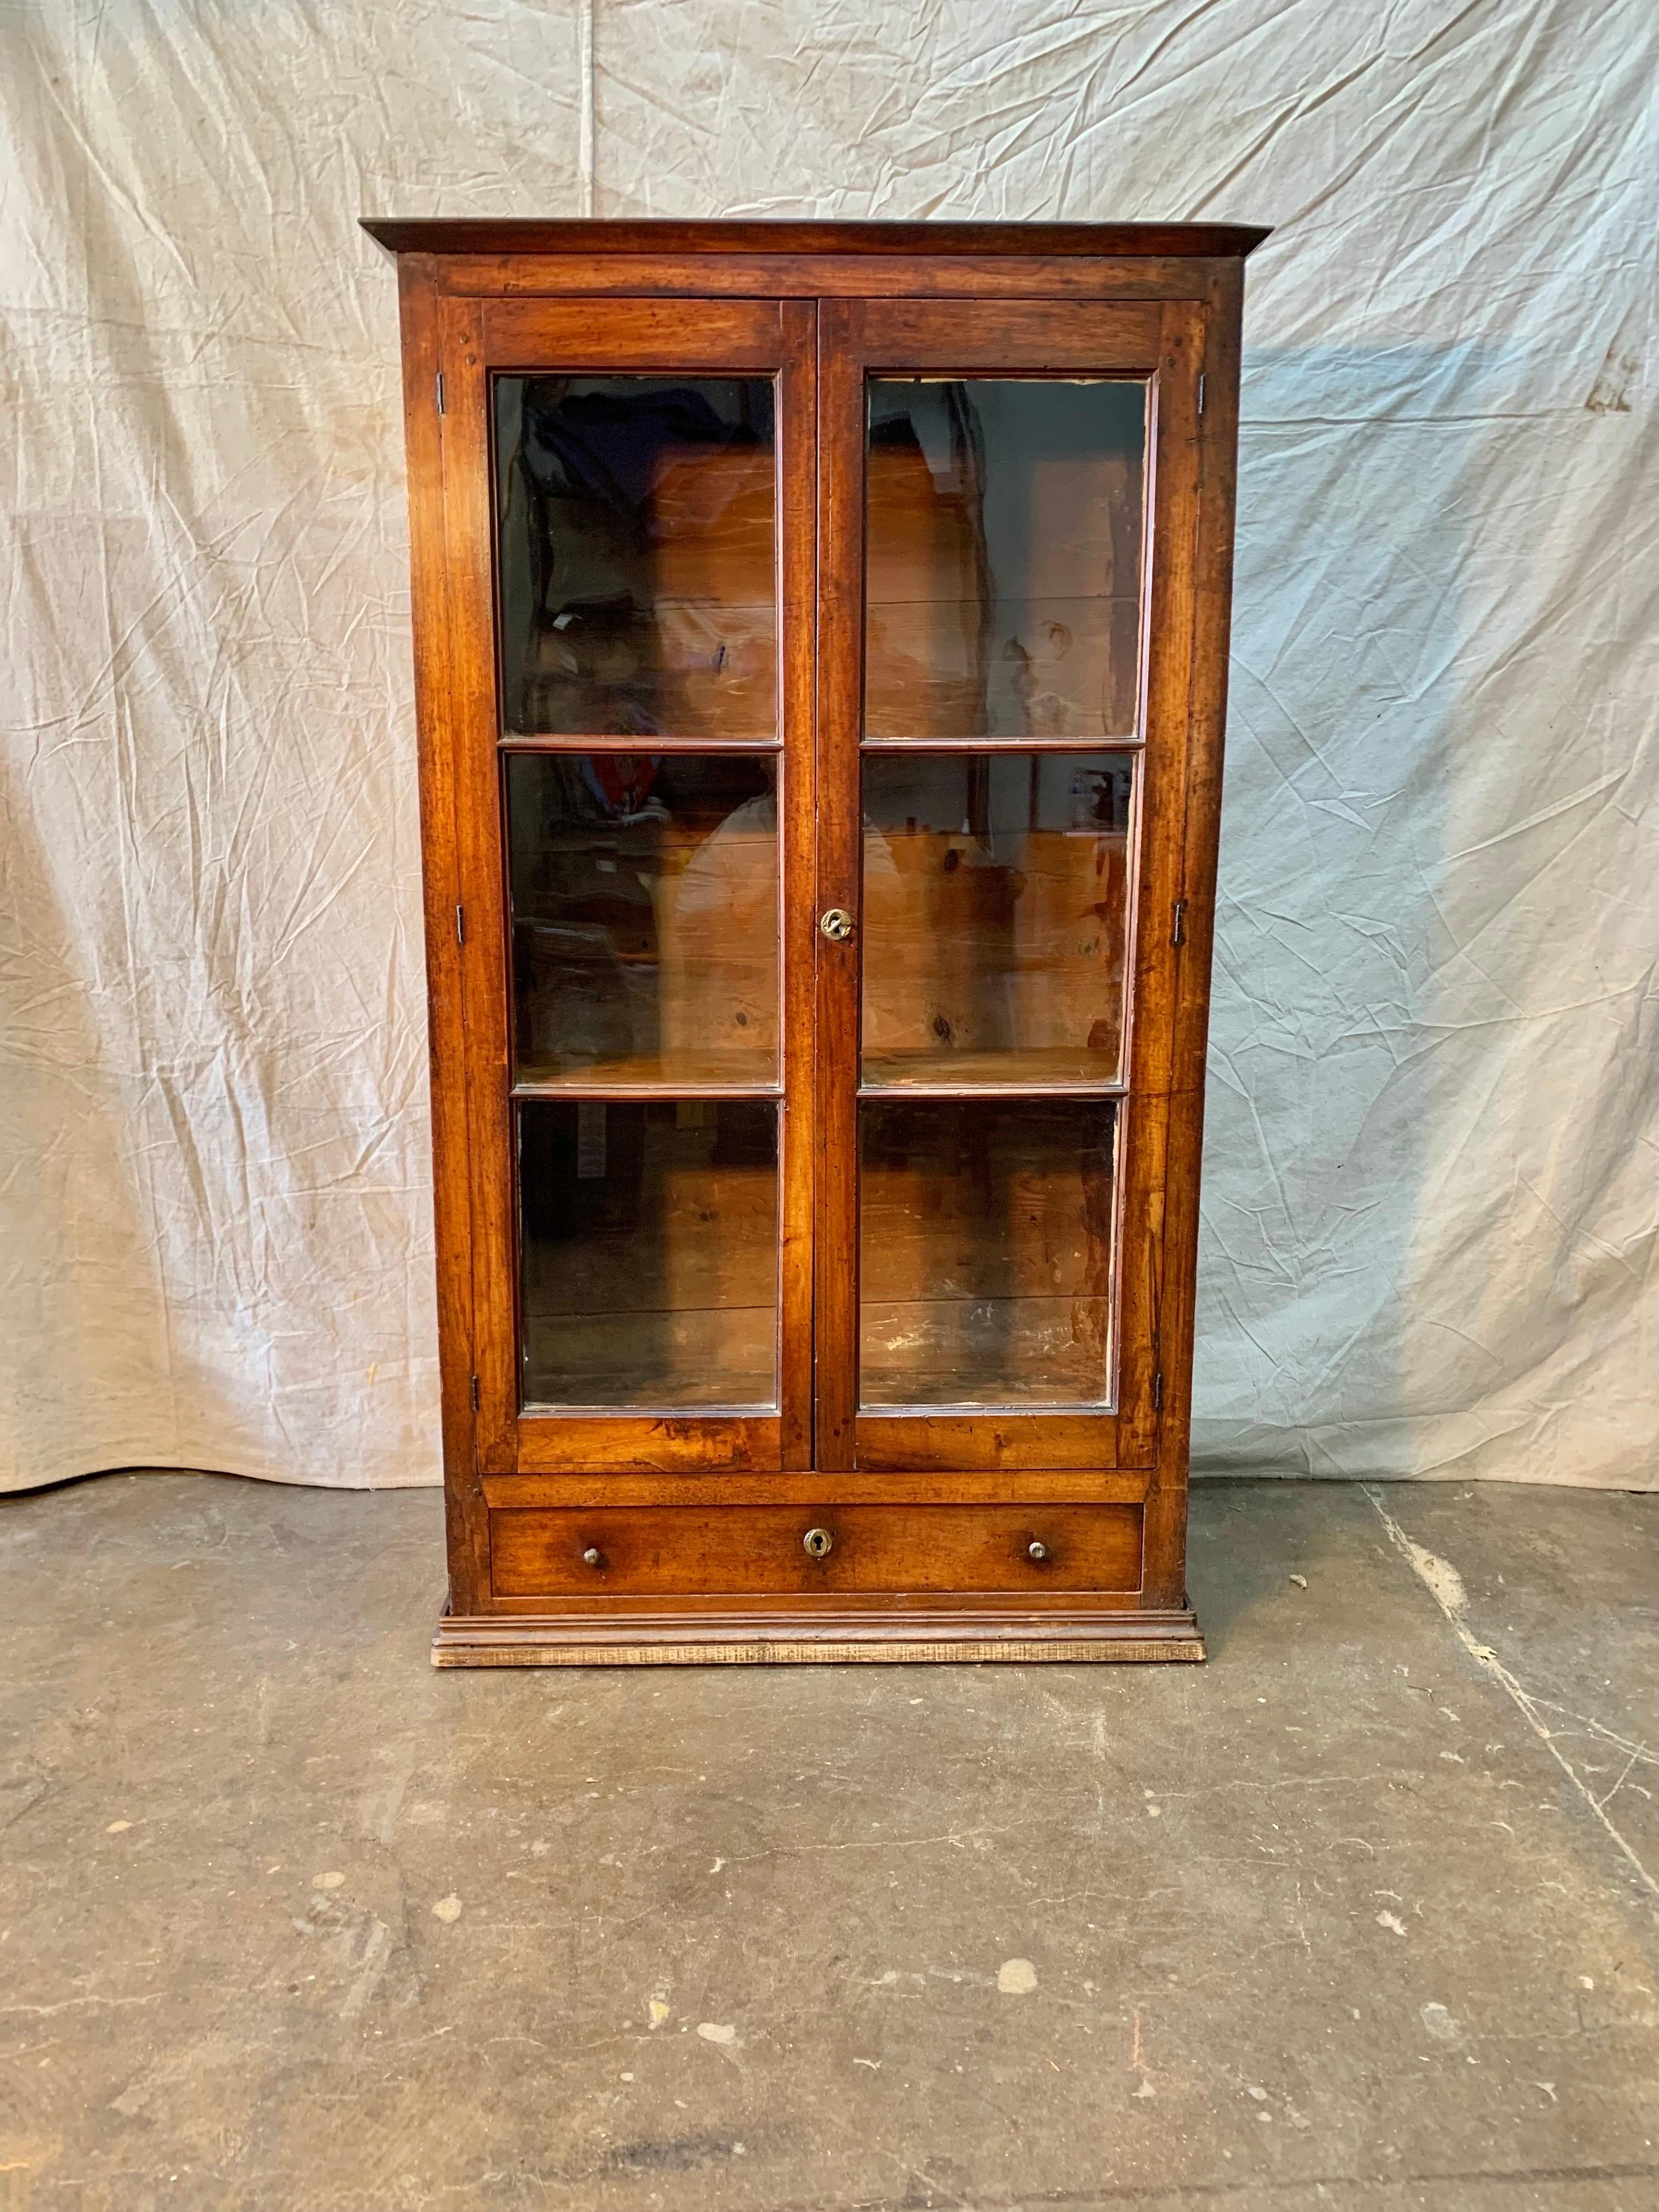 Found in the South of France, this handsome Walnut Glass Front Display Cabinet or Bookcase was crafted from old growth walnut by French artisans in the late 1800s. The piece features two glass paneled doors that open to reveal two adjustable shelves